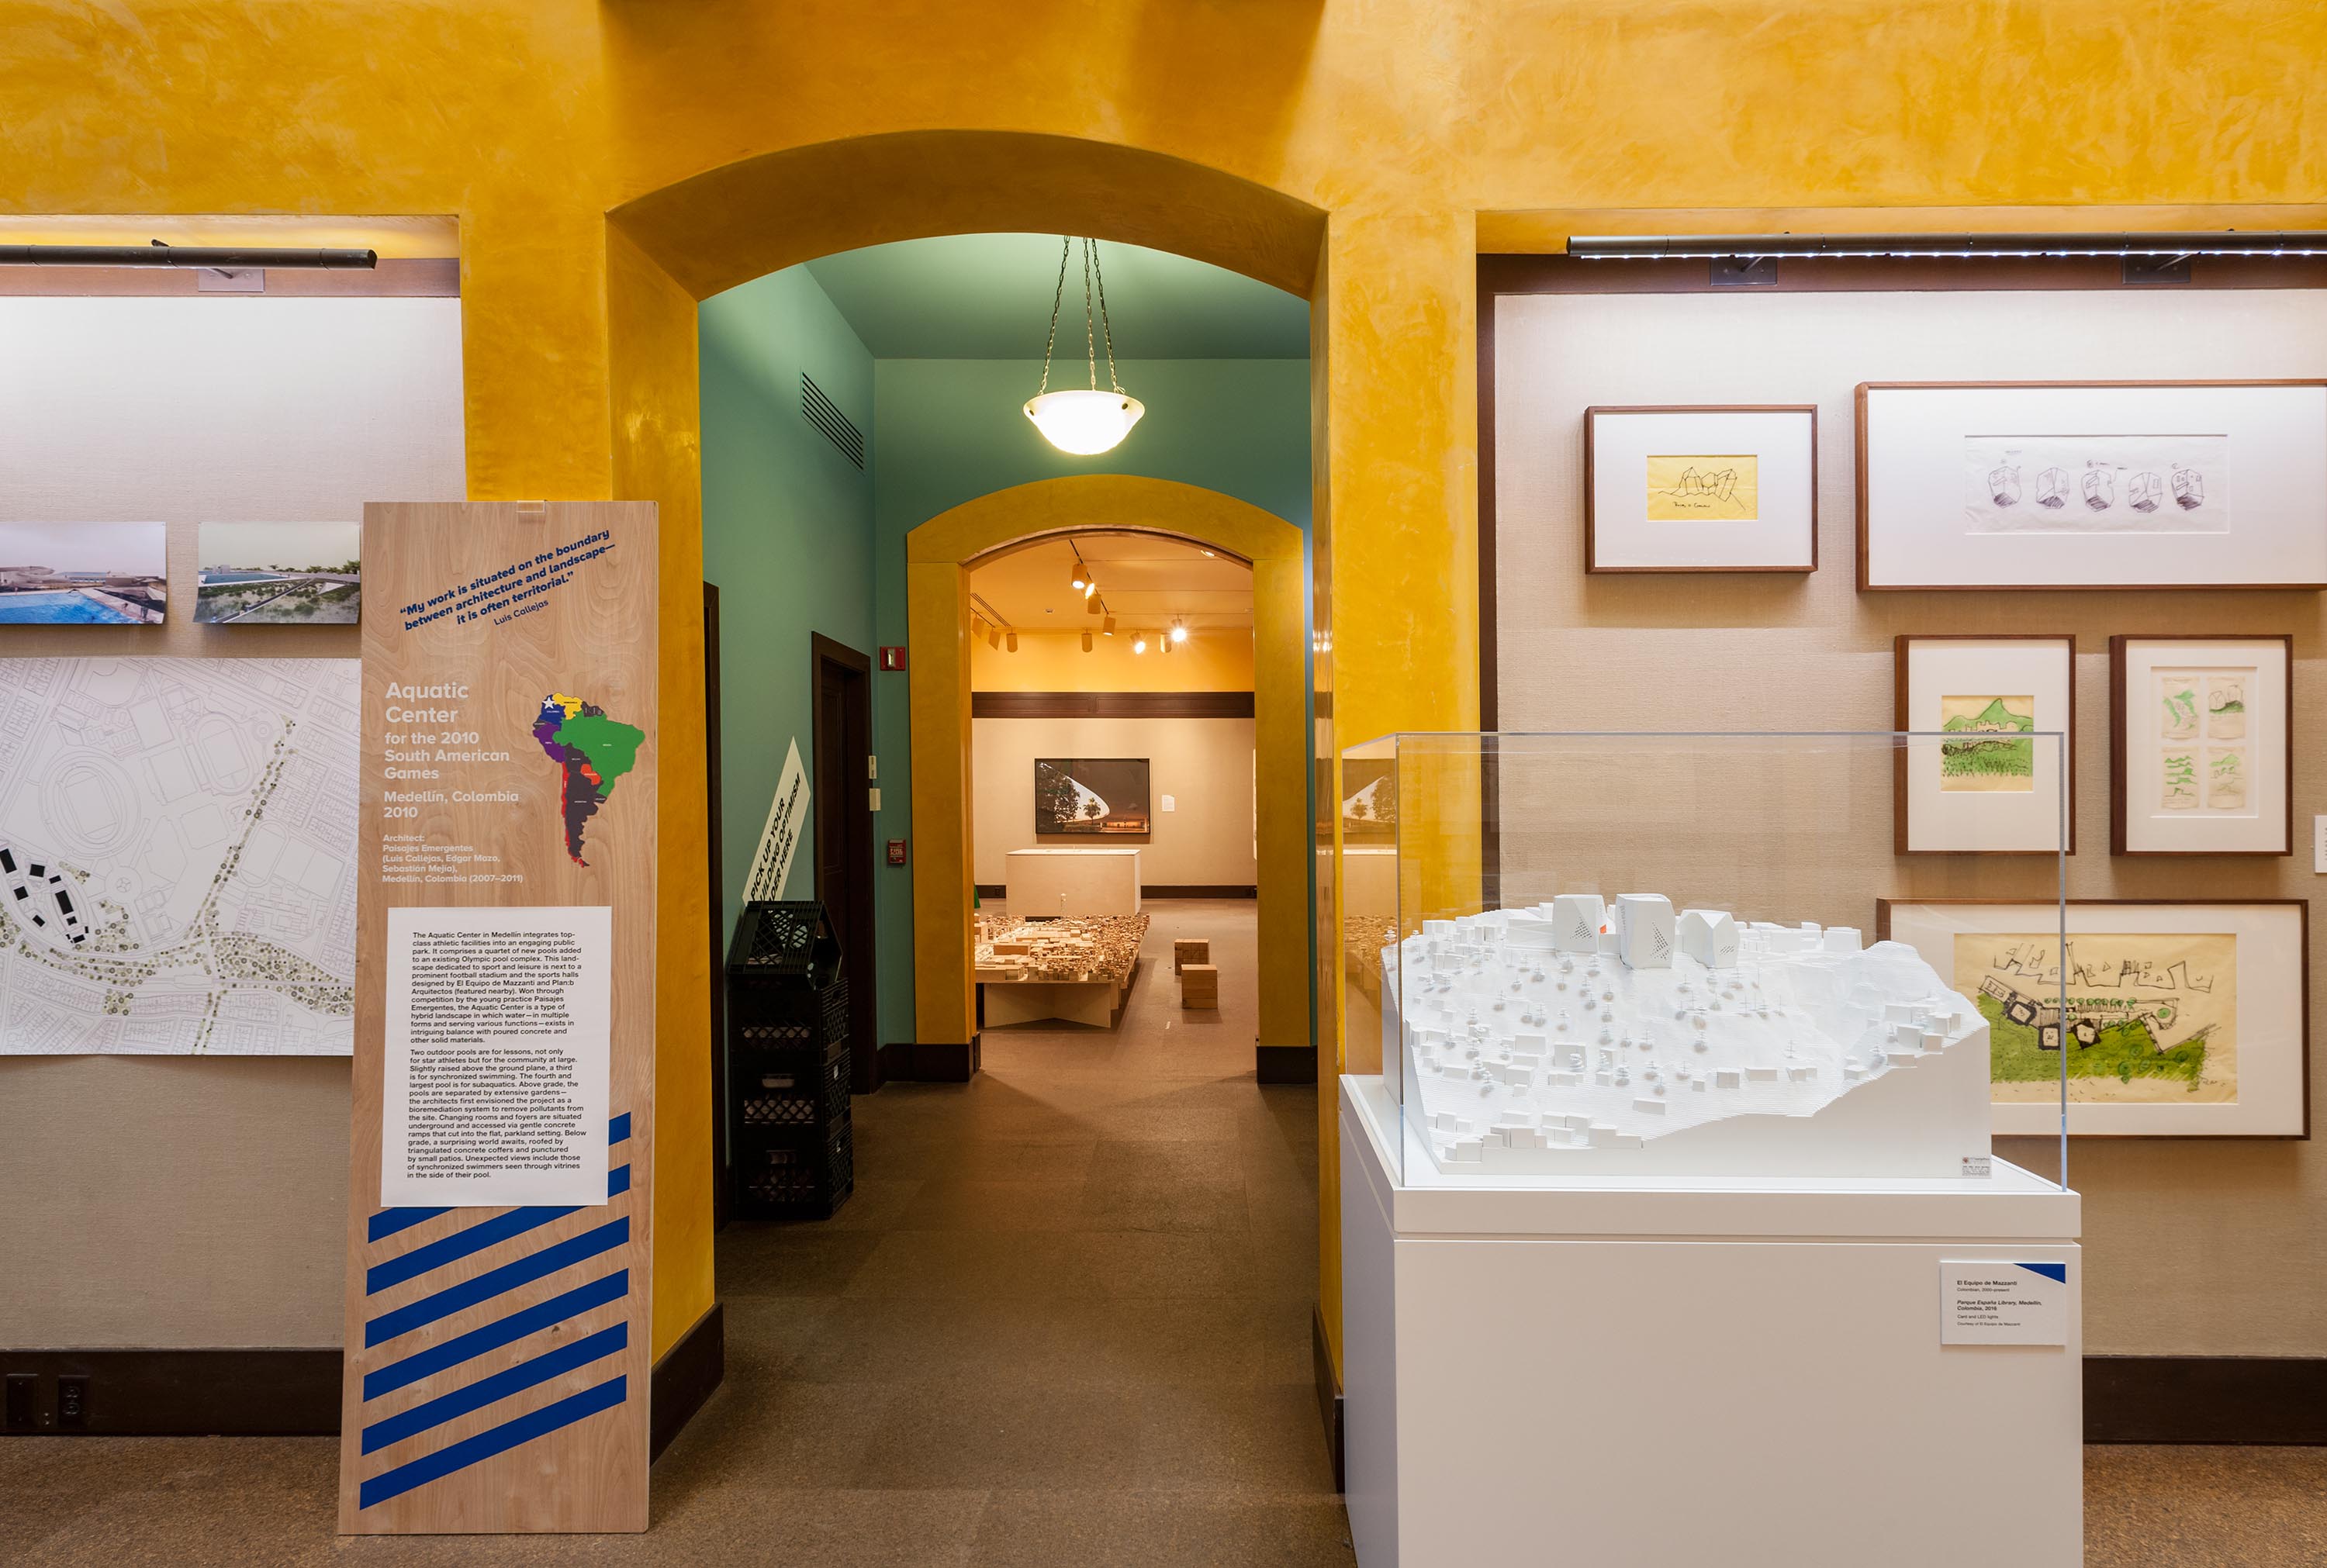 Installation view, “Building Optimism: Public Space in South America” at Carnegie Museum of Art, Photo: Bryan Conley